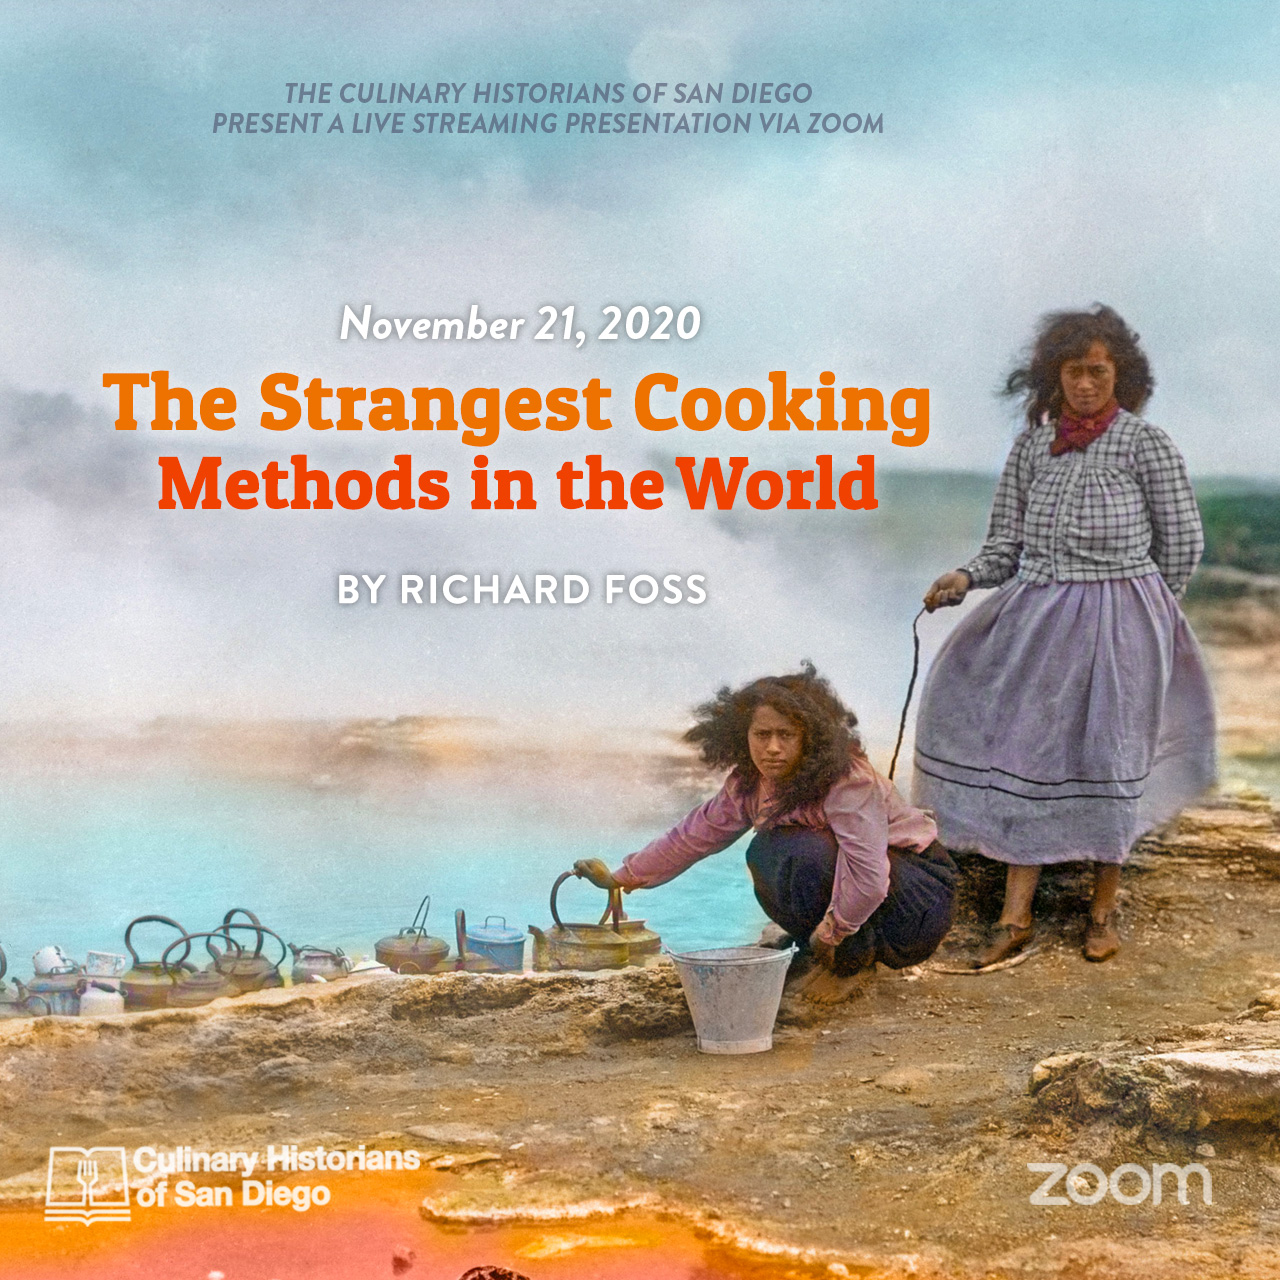 The Strangest Cooking Methods in the World by Richard Foss